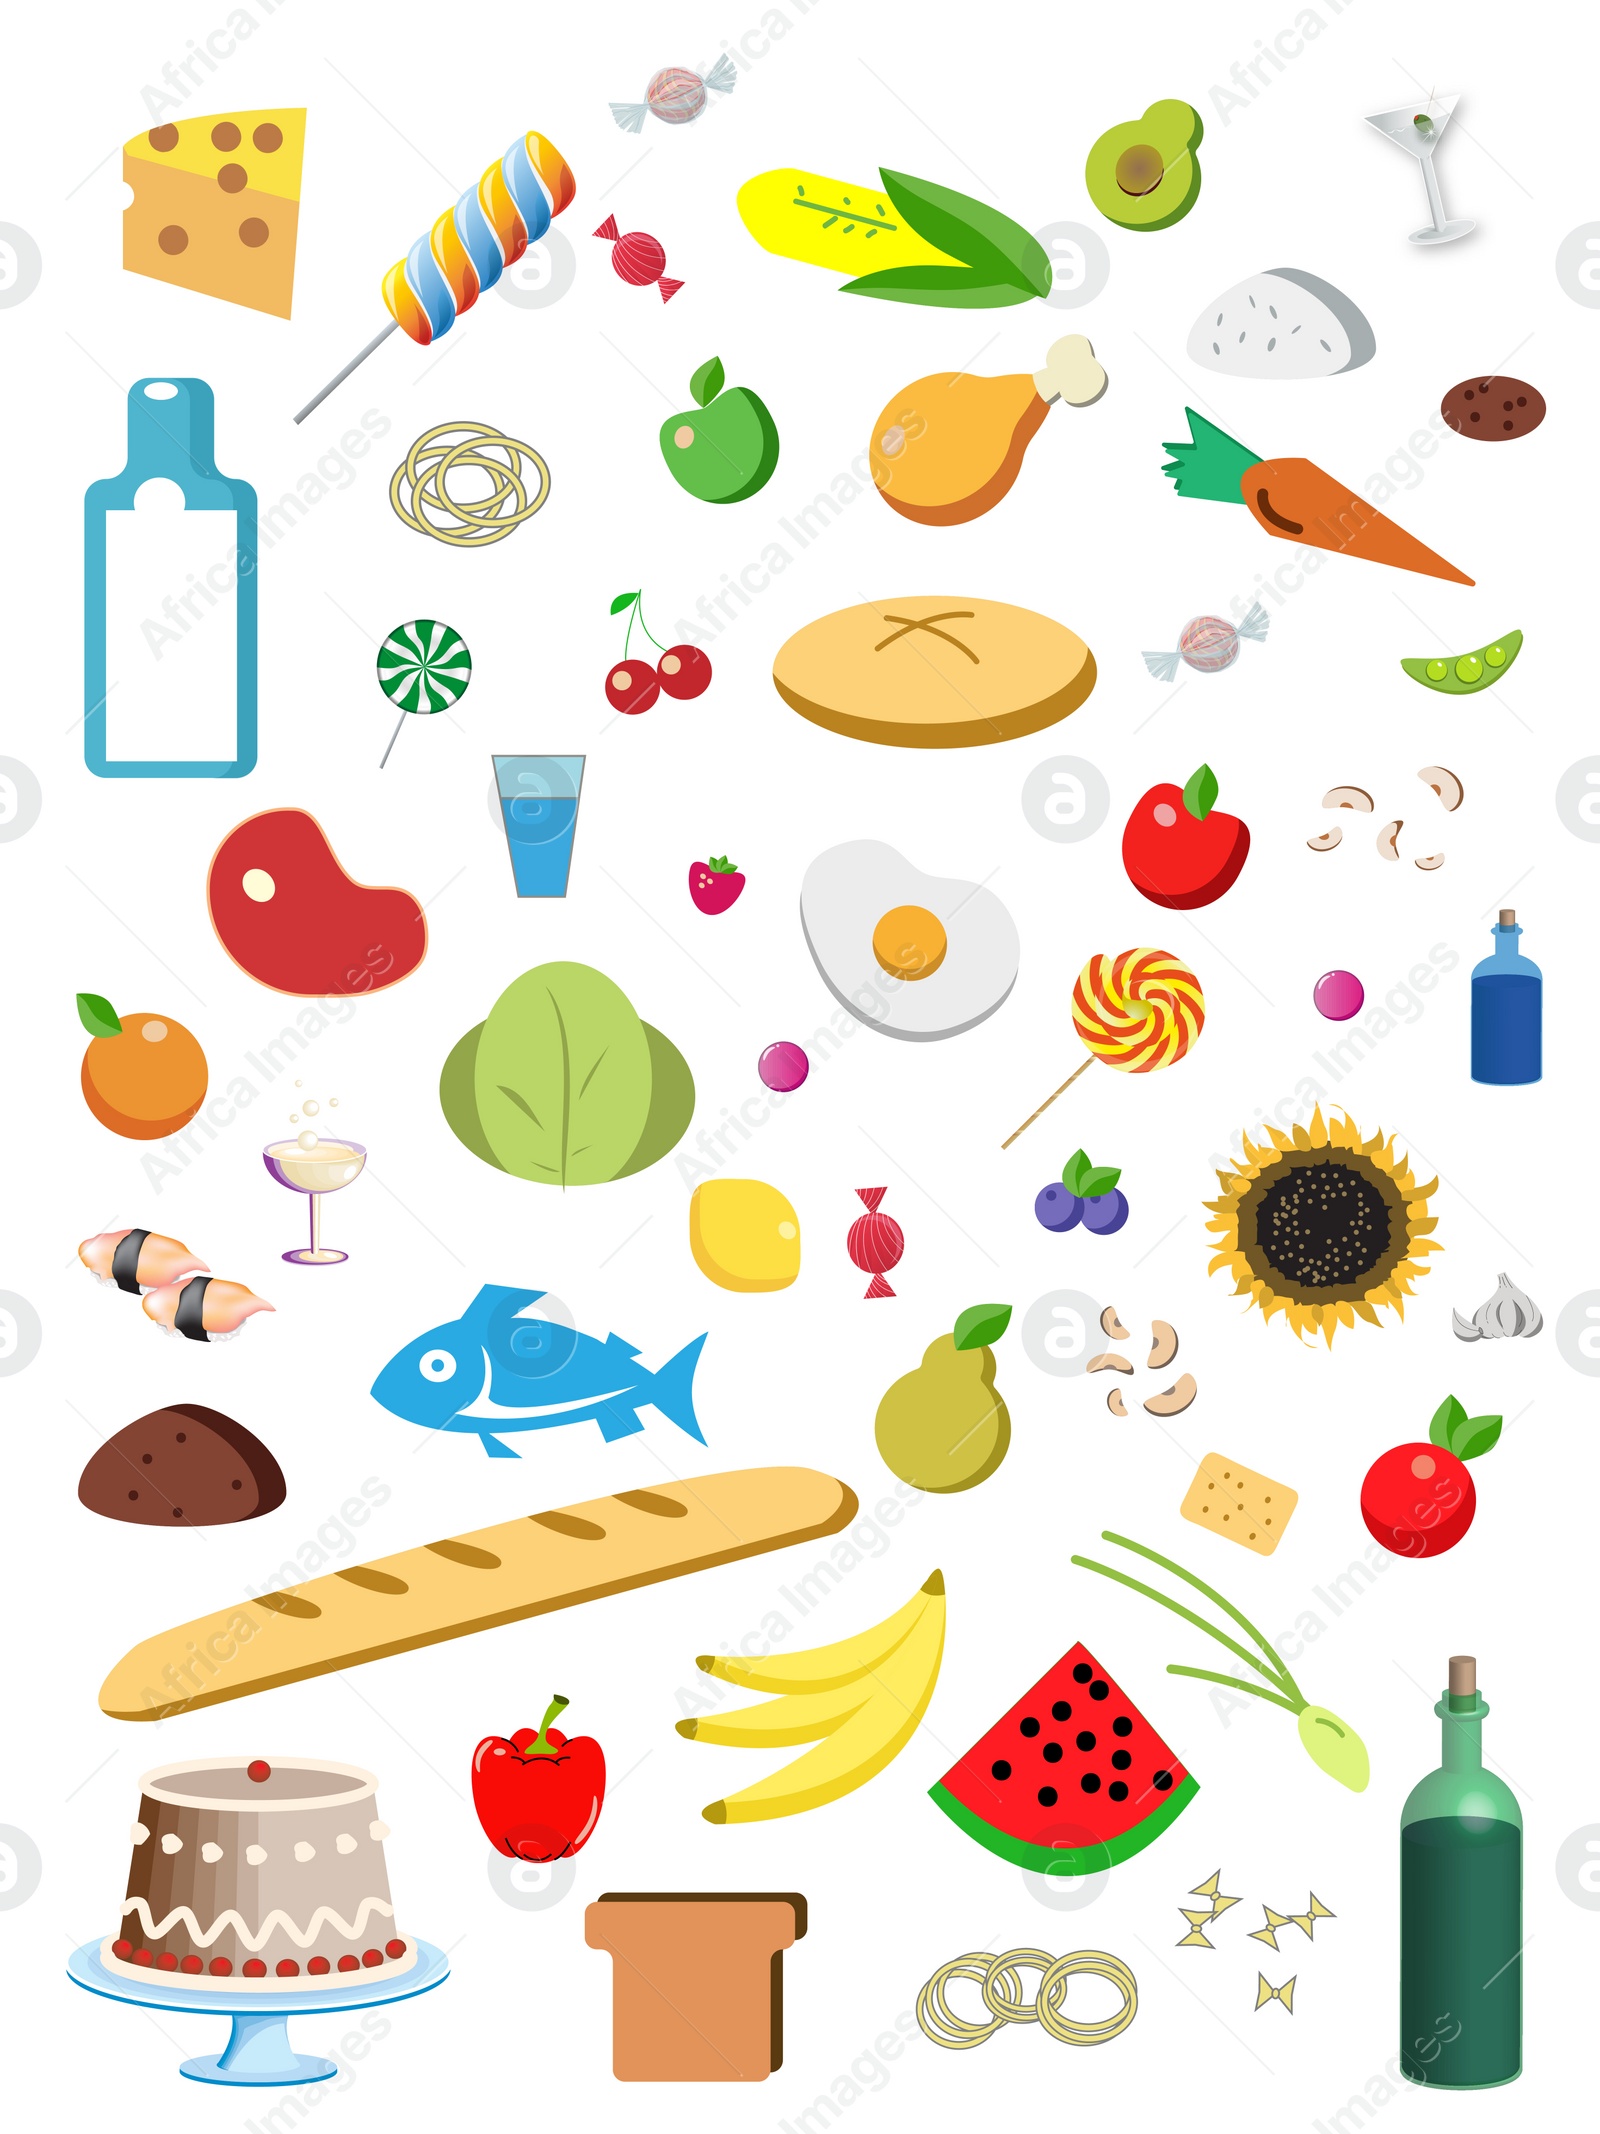 Illustration of Illustrations of different products on white background. Nutritionist's recommendations